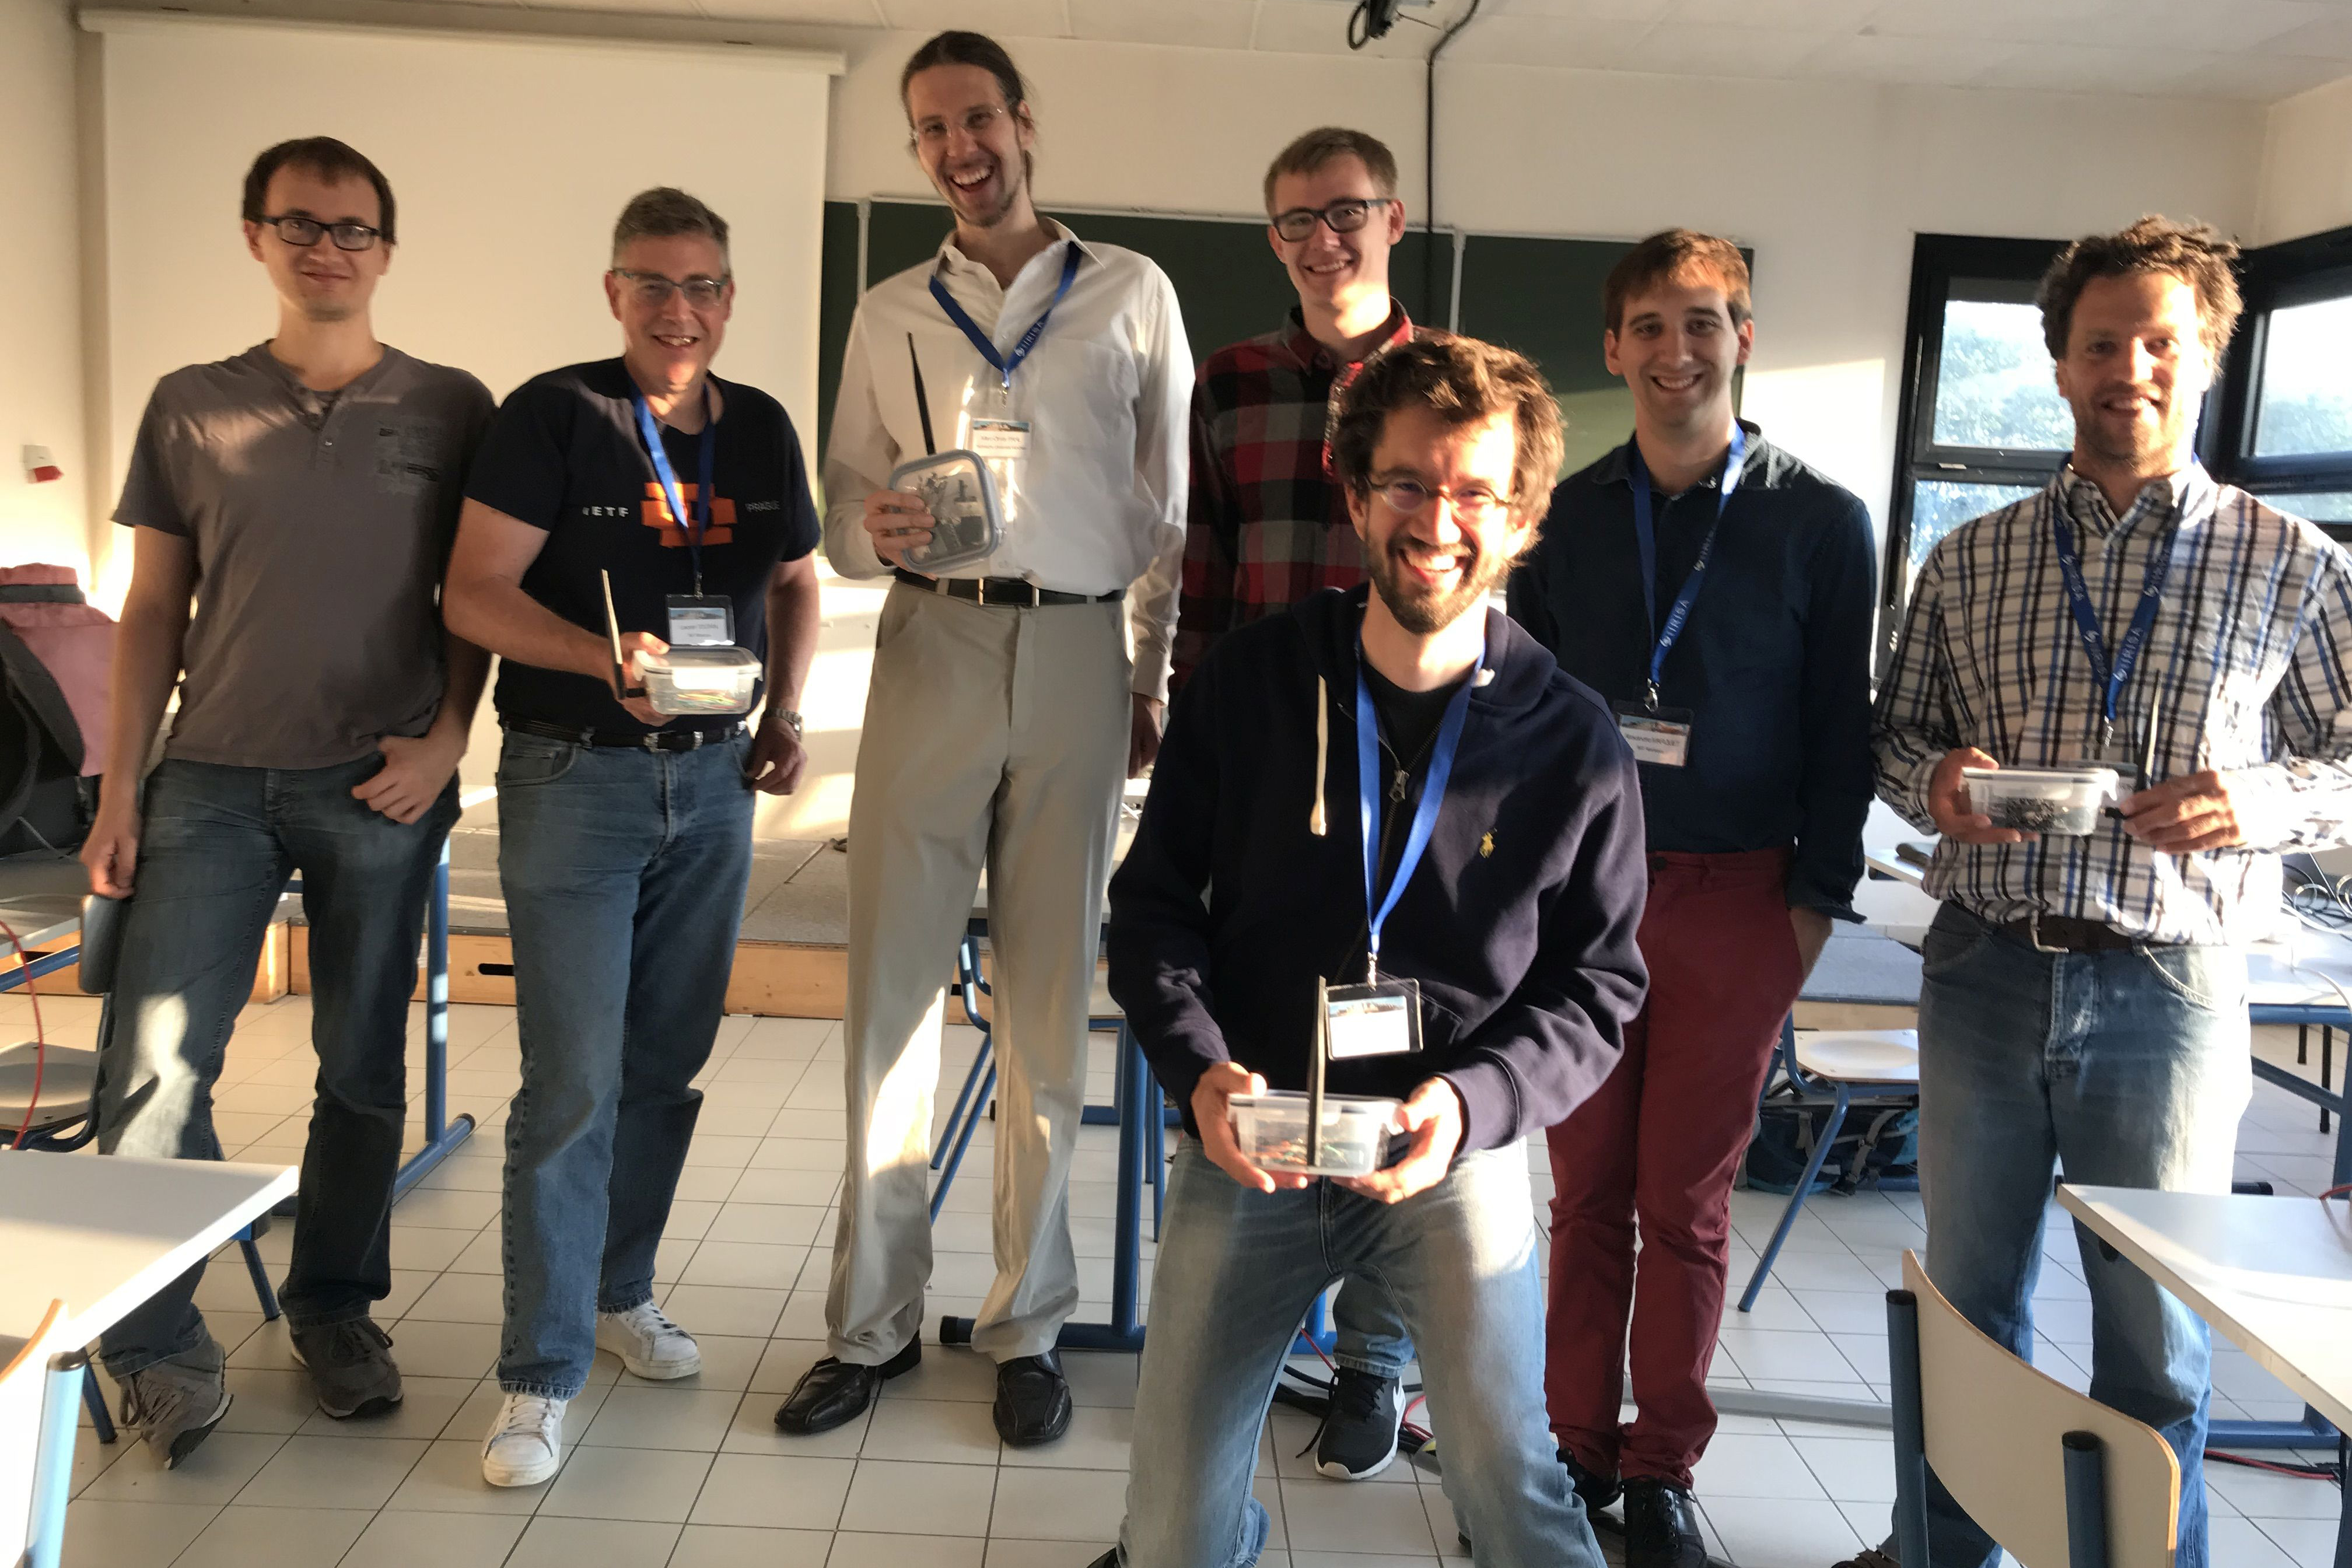 At the Summer School in Saint-Malo, the participants didn't only learn about the IIoT, but also built a bond of trust and friendship.